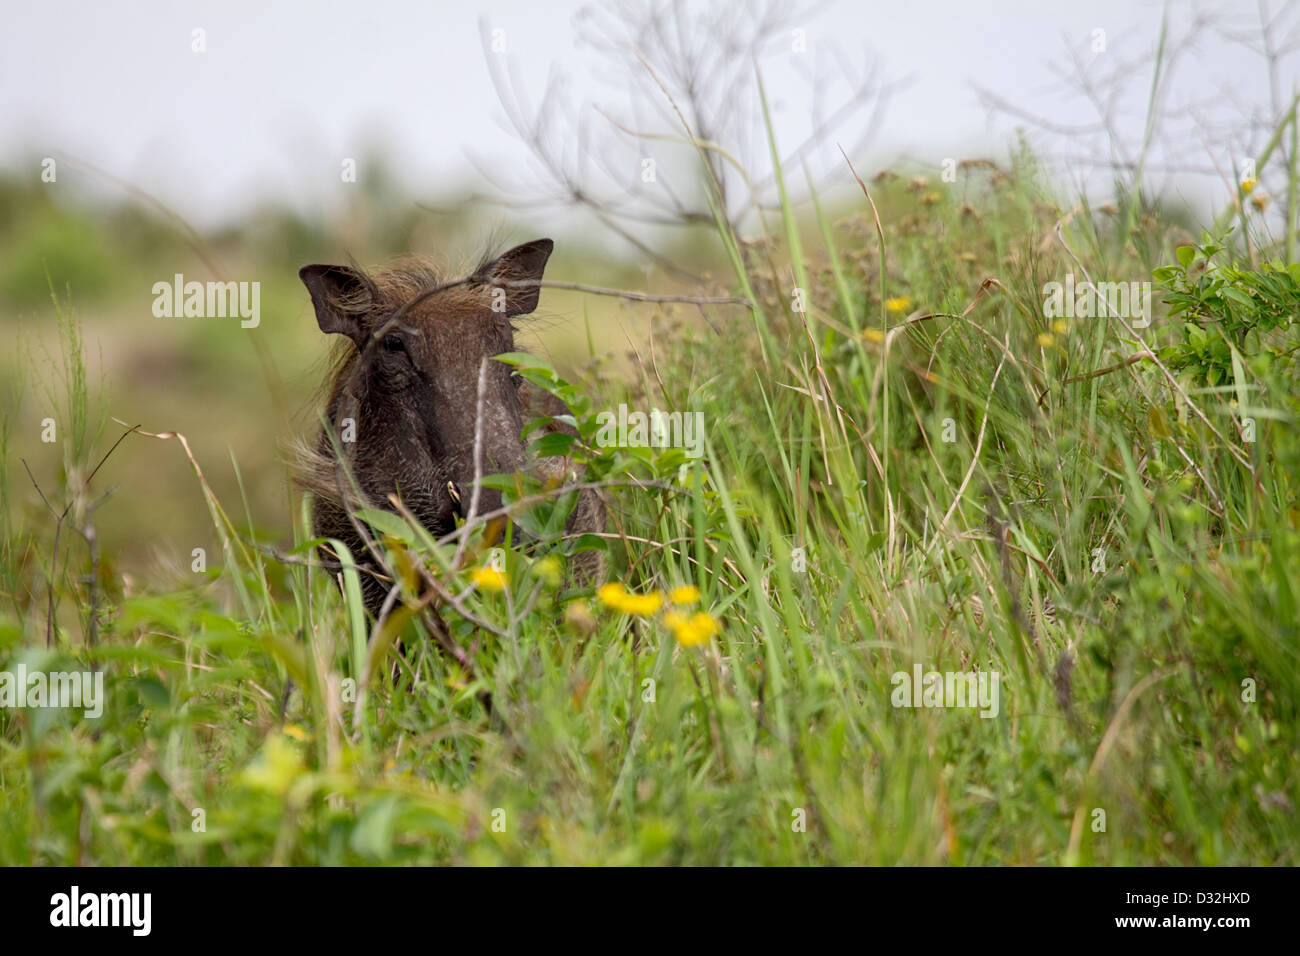 Common warthog peering out from concealment in tall grassland in South Africa Stock Photo